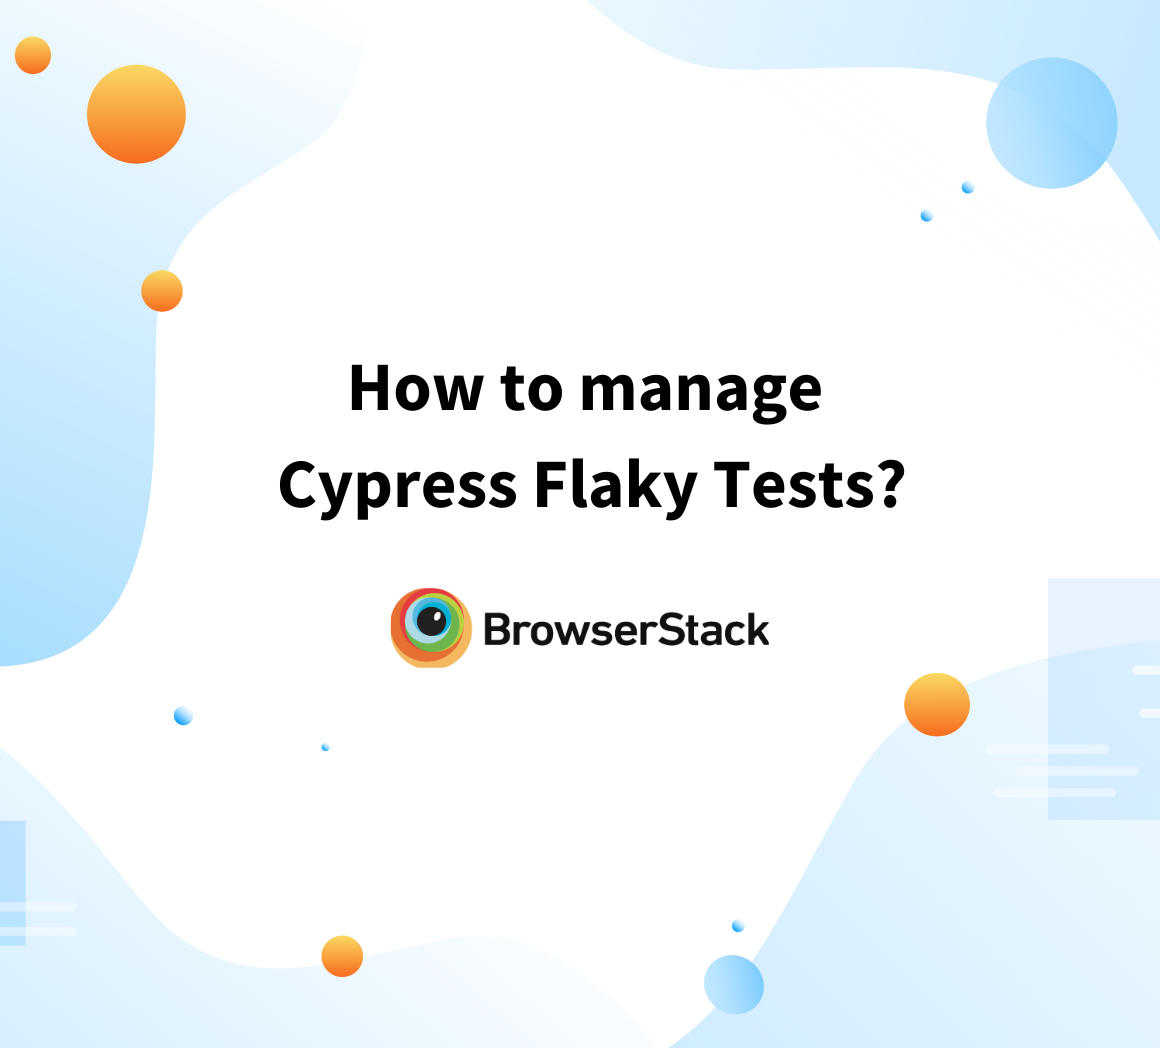 How to manage Cypress Flaky Tests